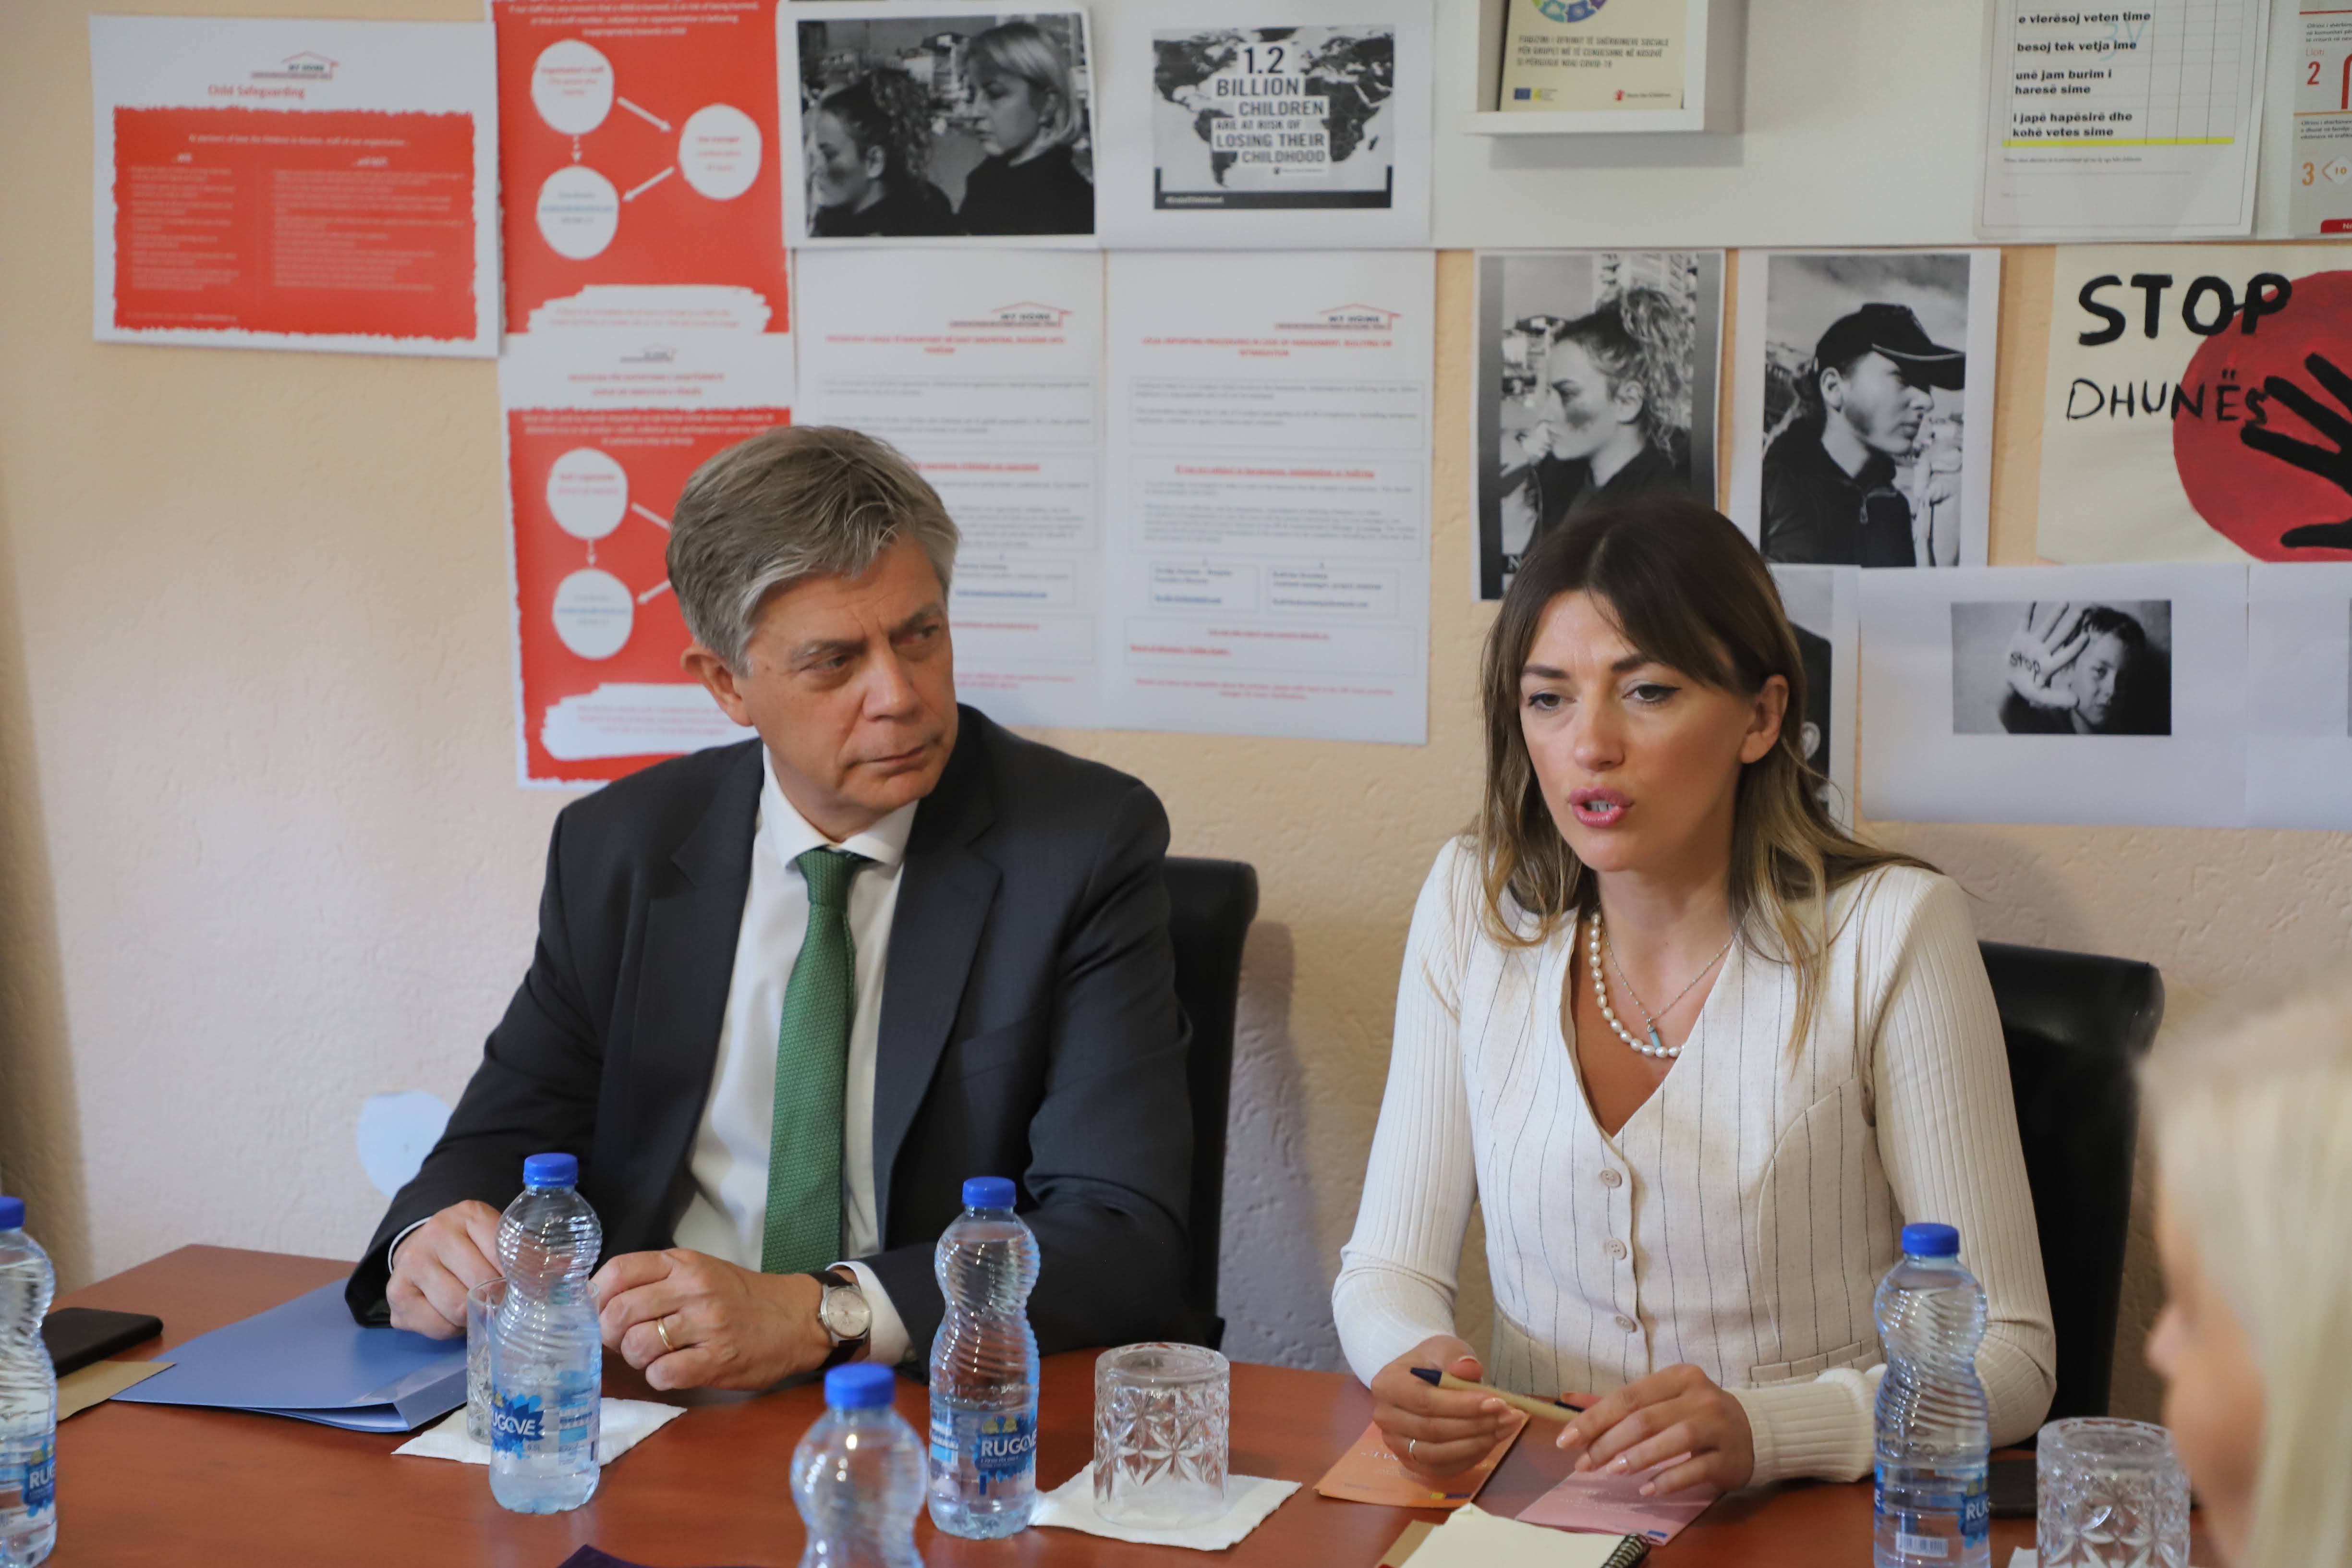 EULEX Head and Kosovo Minister of Justice Visit the “Center for Protection of Women and Children - My Home” in Ferizaj/Uroševac